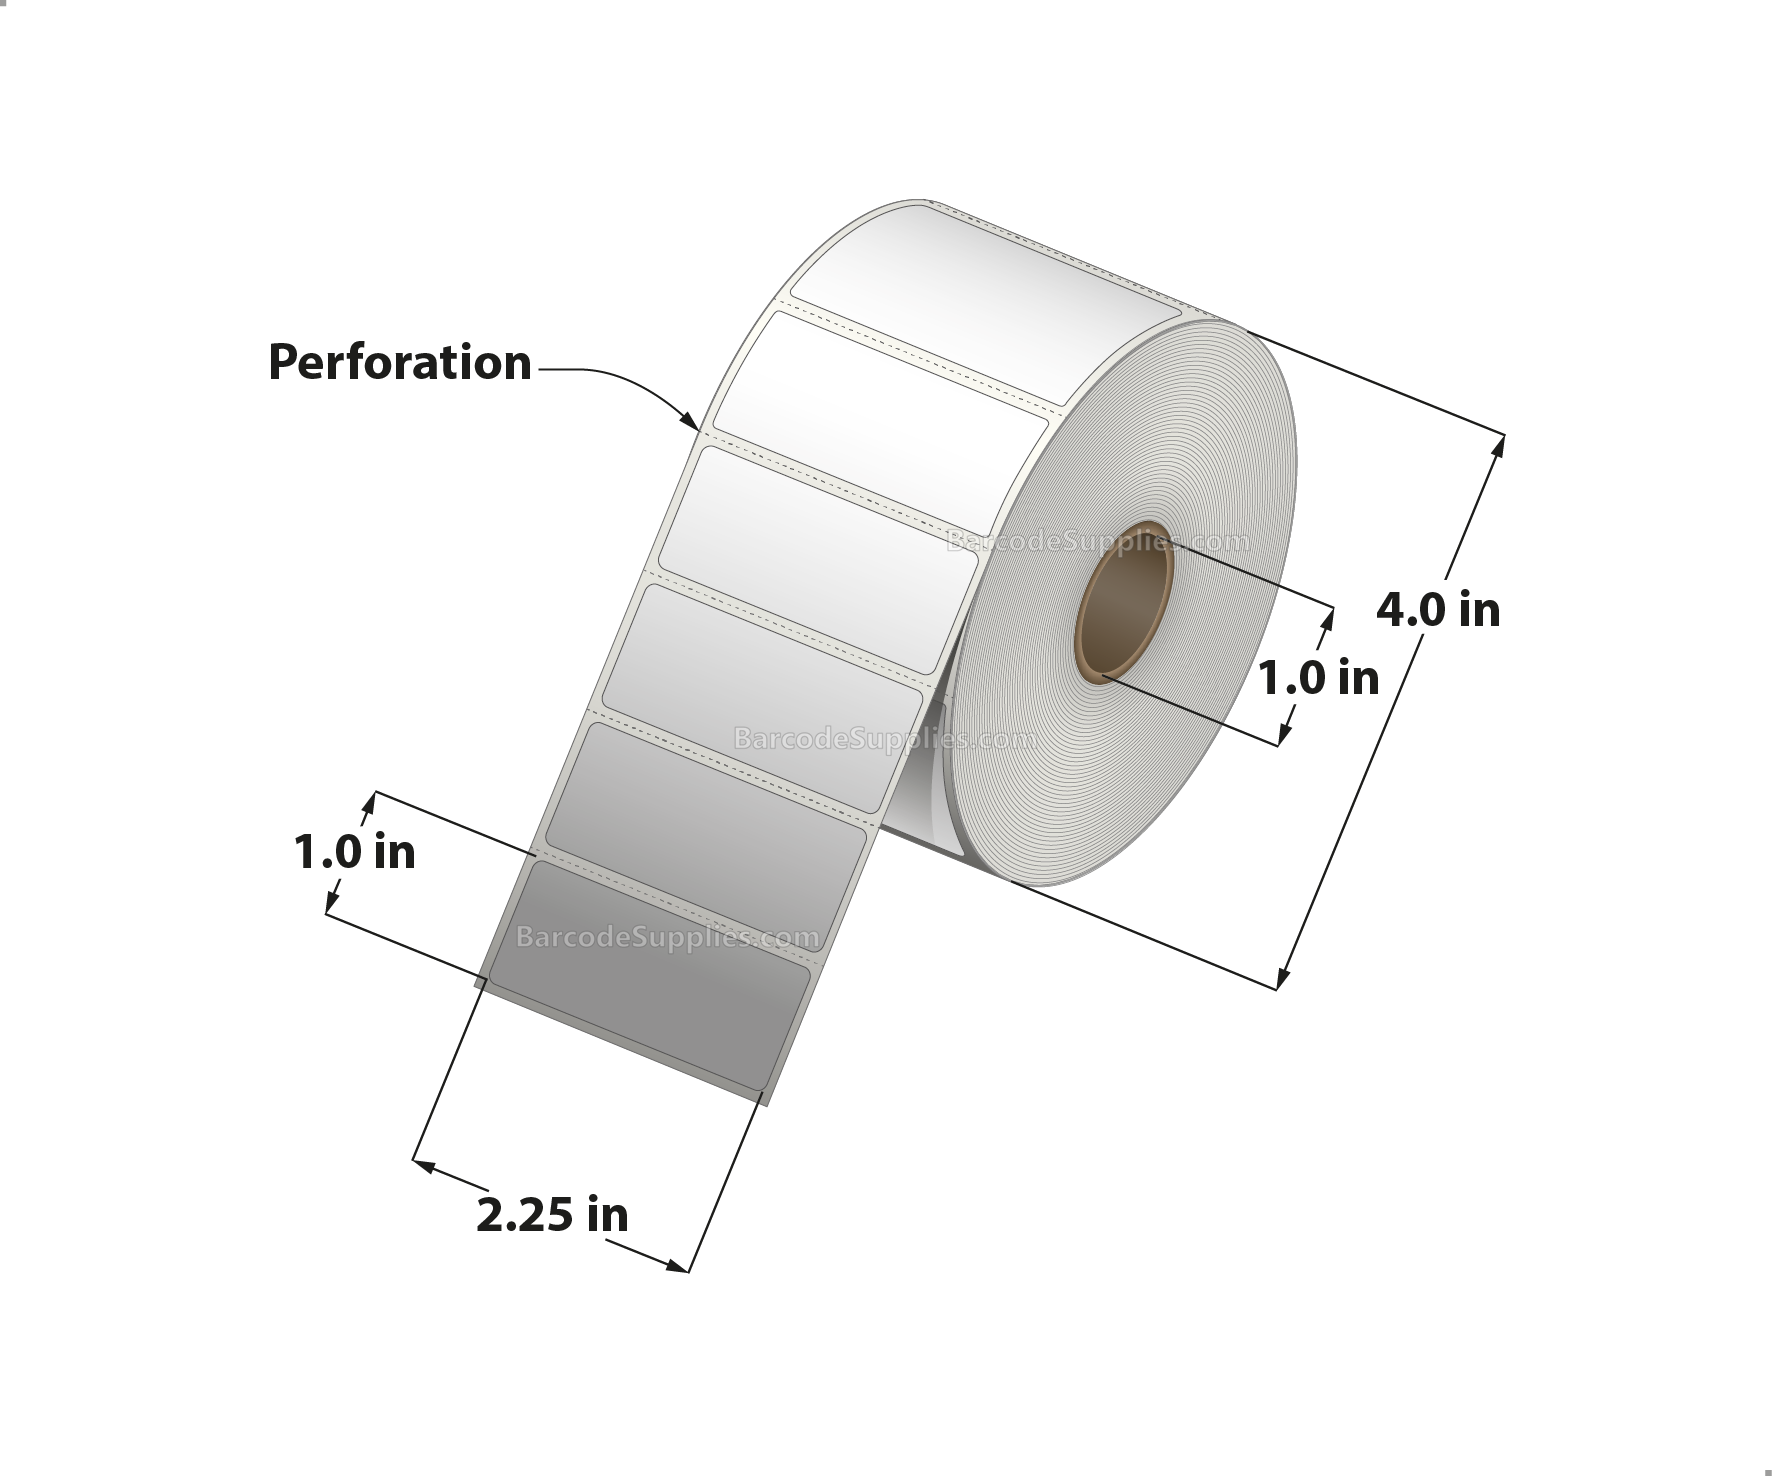 2.25 x 1 Direct Thermal White Labels With Acrylic Adhesive - Perforated - 1375 Labels Per Roll - Carton Of 12 Rolls - 16500 Labels Total - MPN: RD-225-1-1375-1